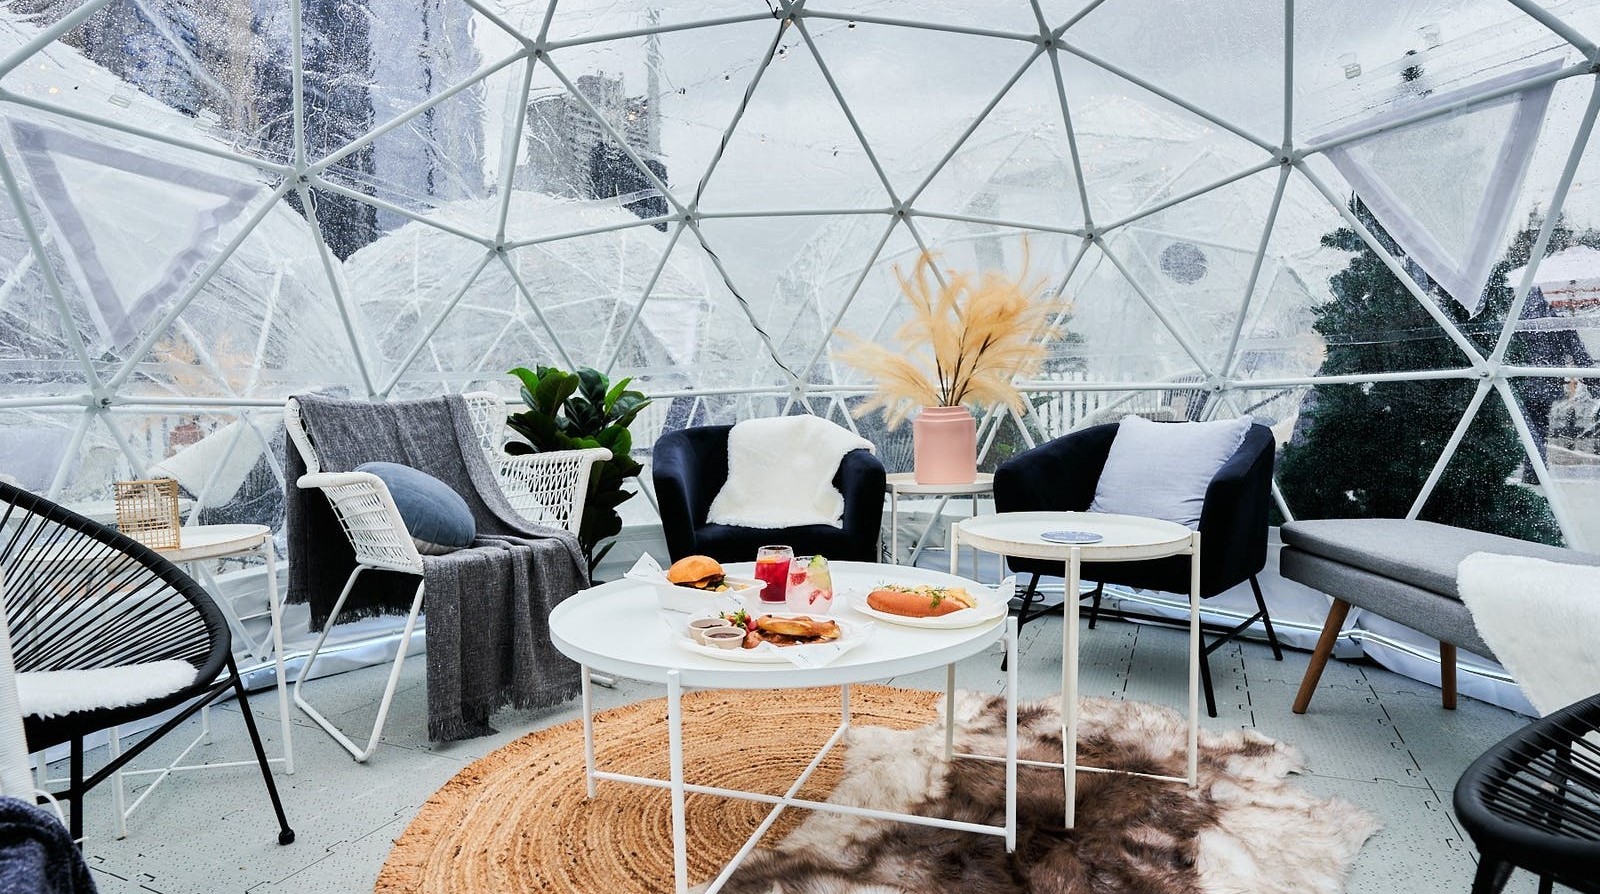 Drink and dine in an igloo at the Winter Wonderland. Image: City of Adelaide